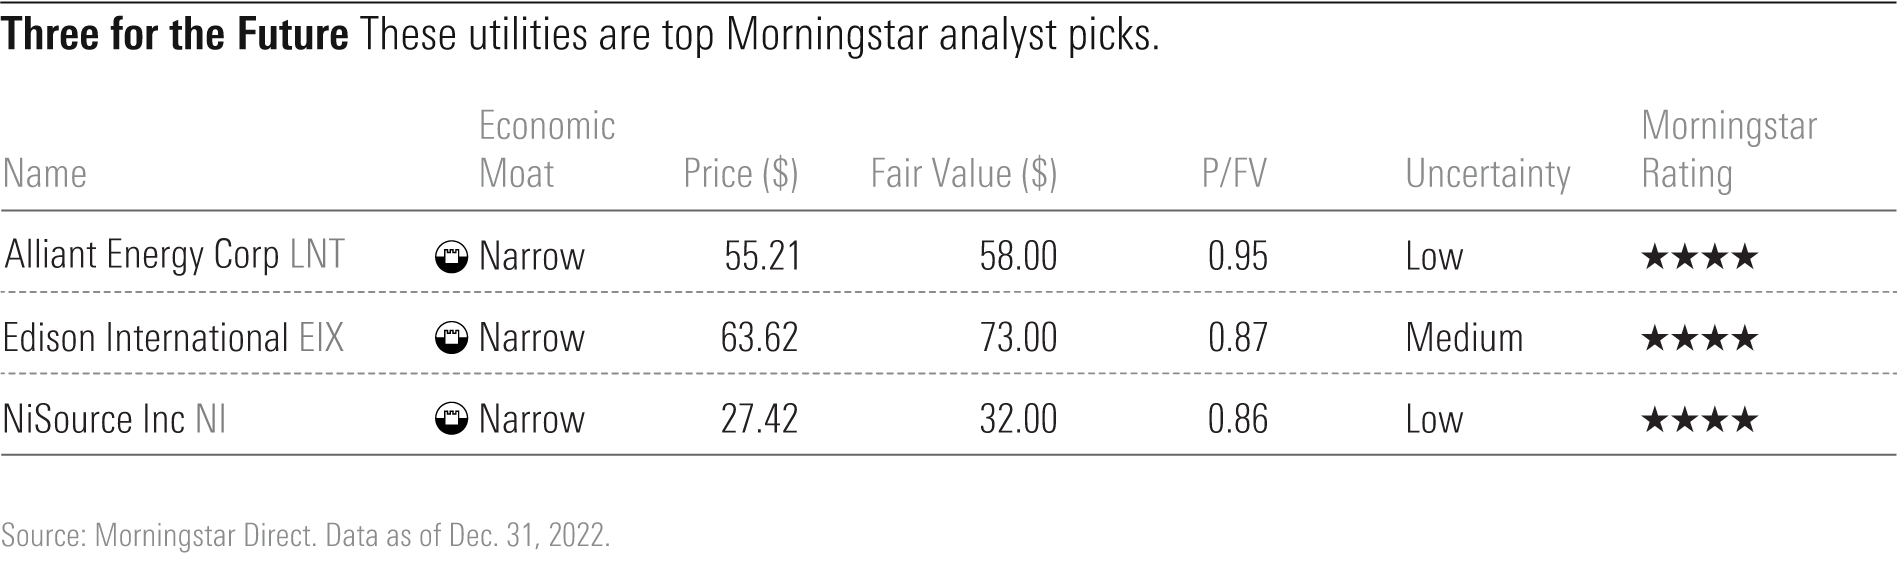 A table that shows the top three utilities Morningstar analyst picks: Alliant Energy, Edison International, and NiSource.